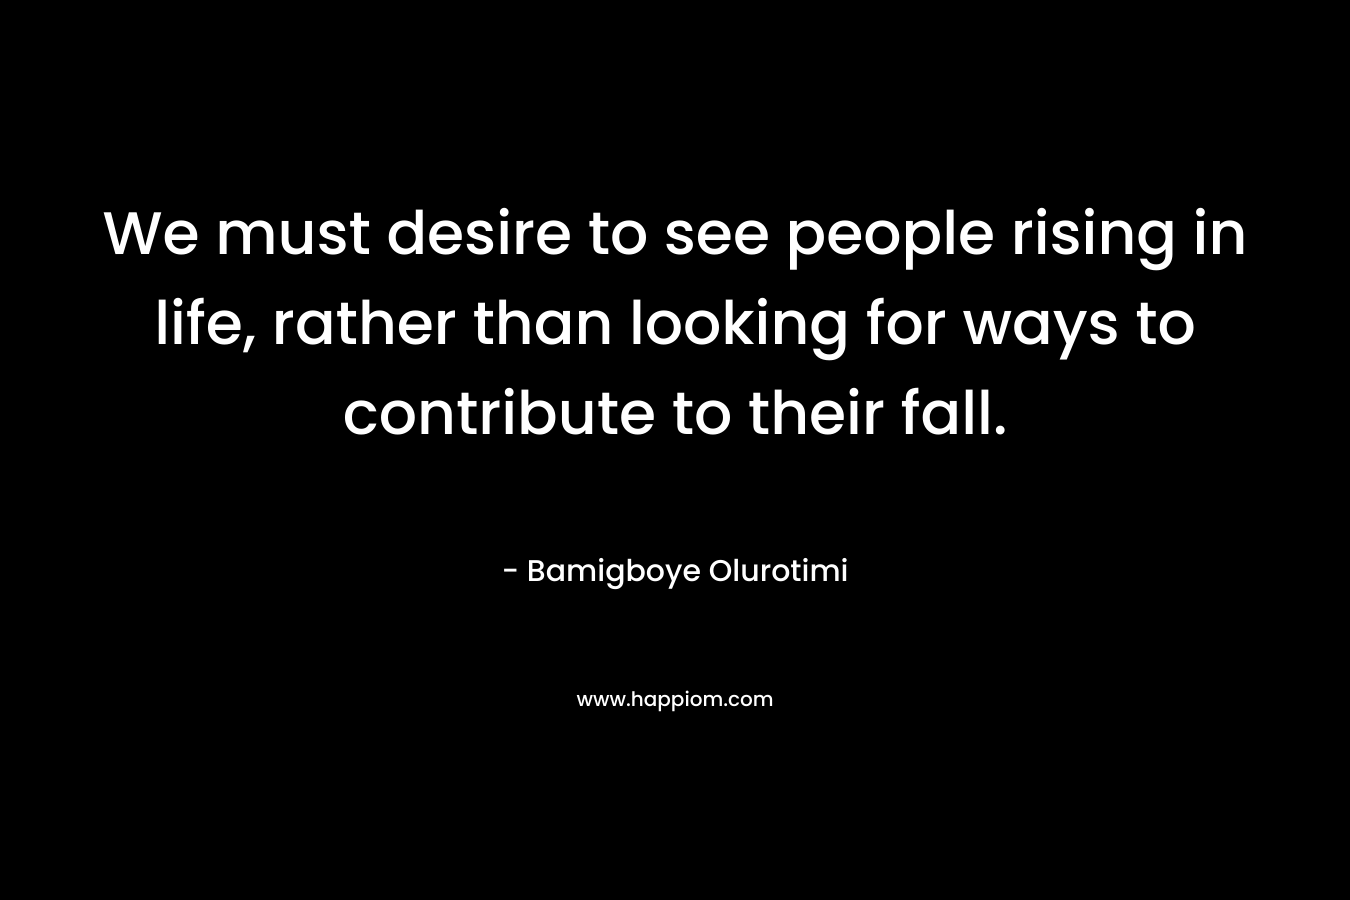 We must desire to see people rising in life, rather than looking for ways to contribute to their fall.